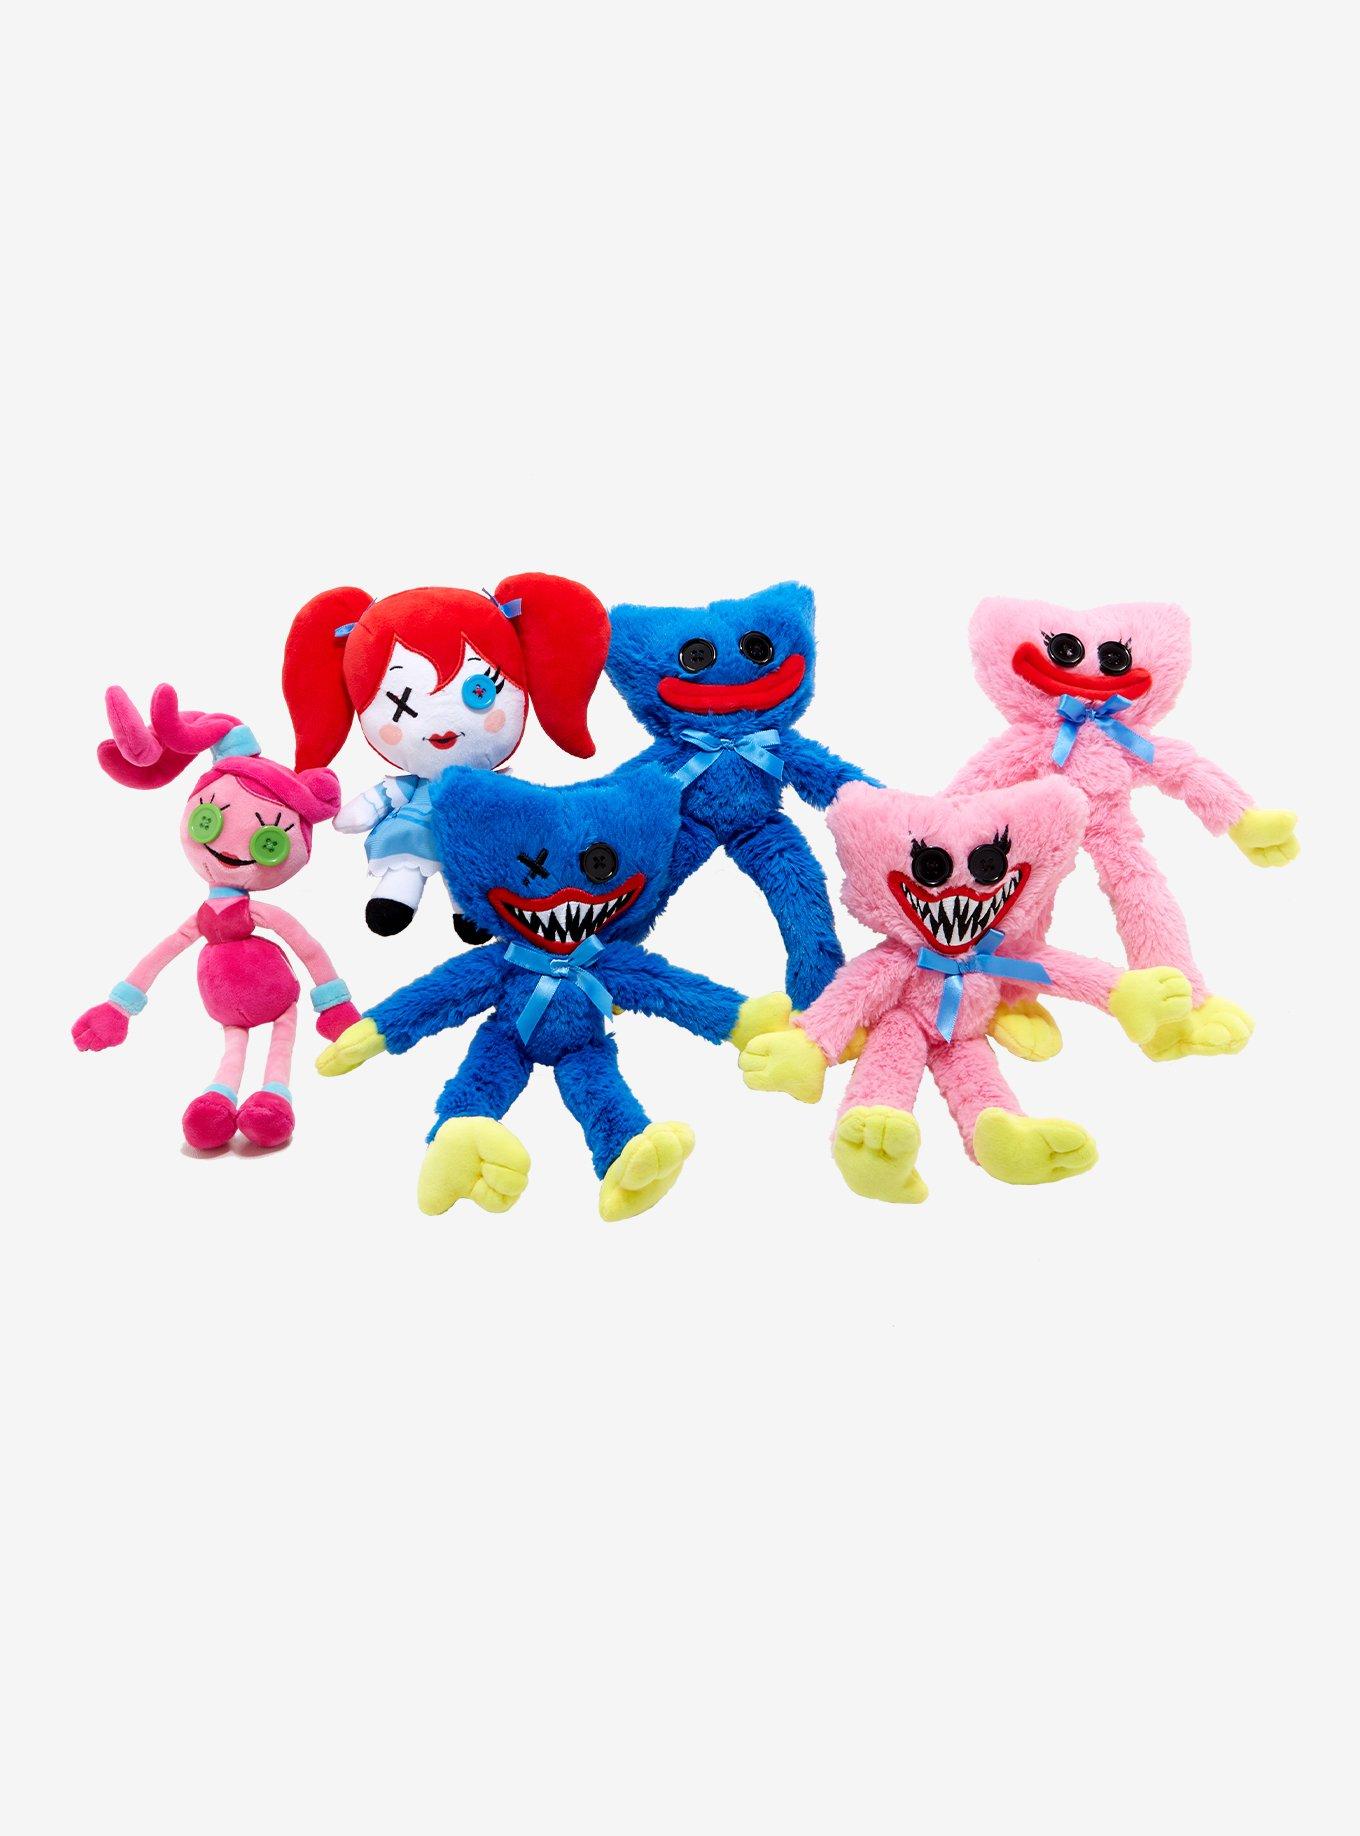 Poppy Playtime Huggy Wuggy Grab Pack Grabpack Stuffed toy Plushie